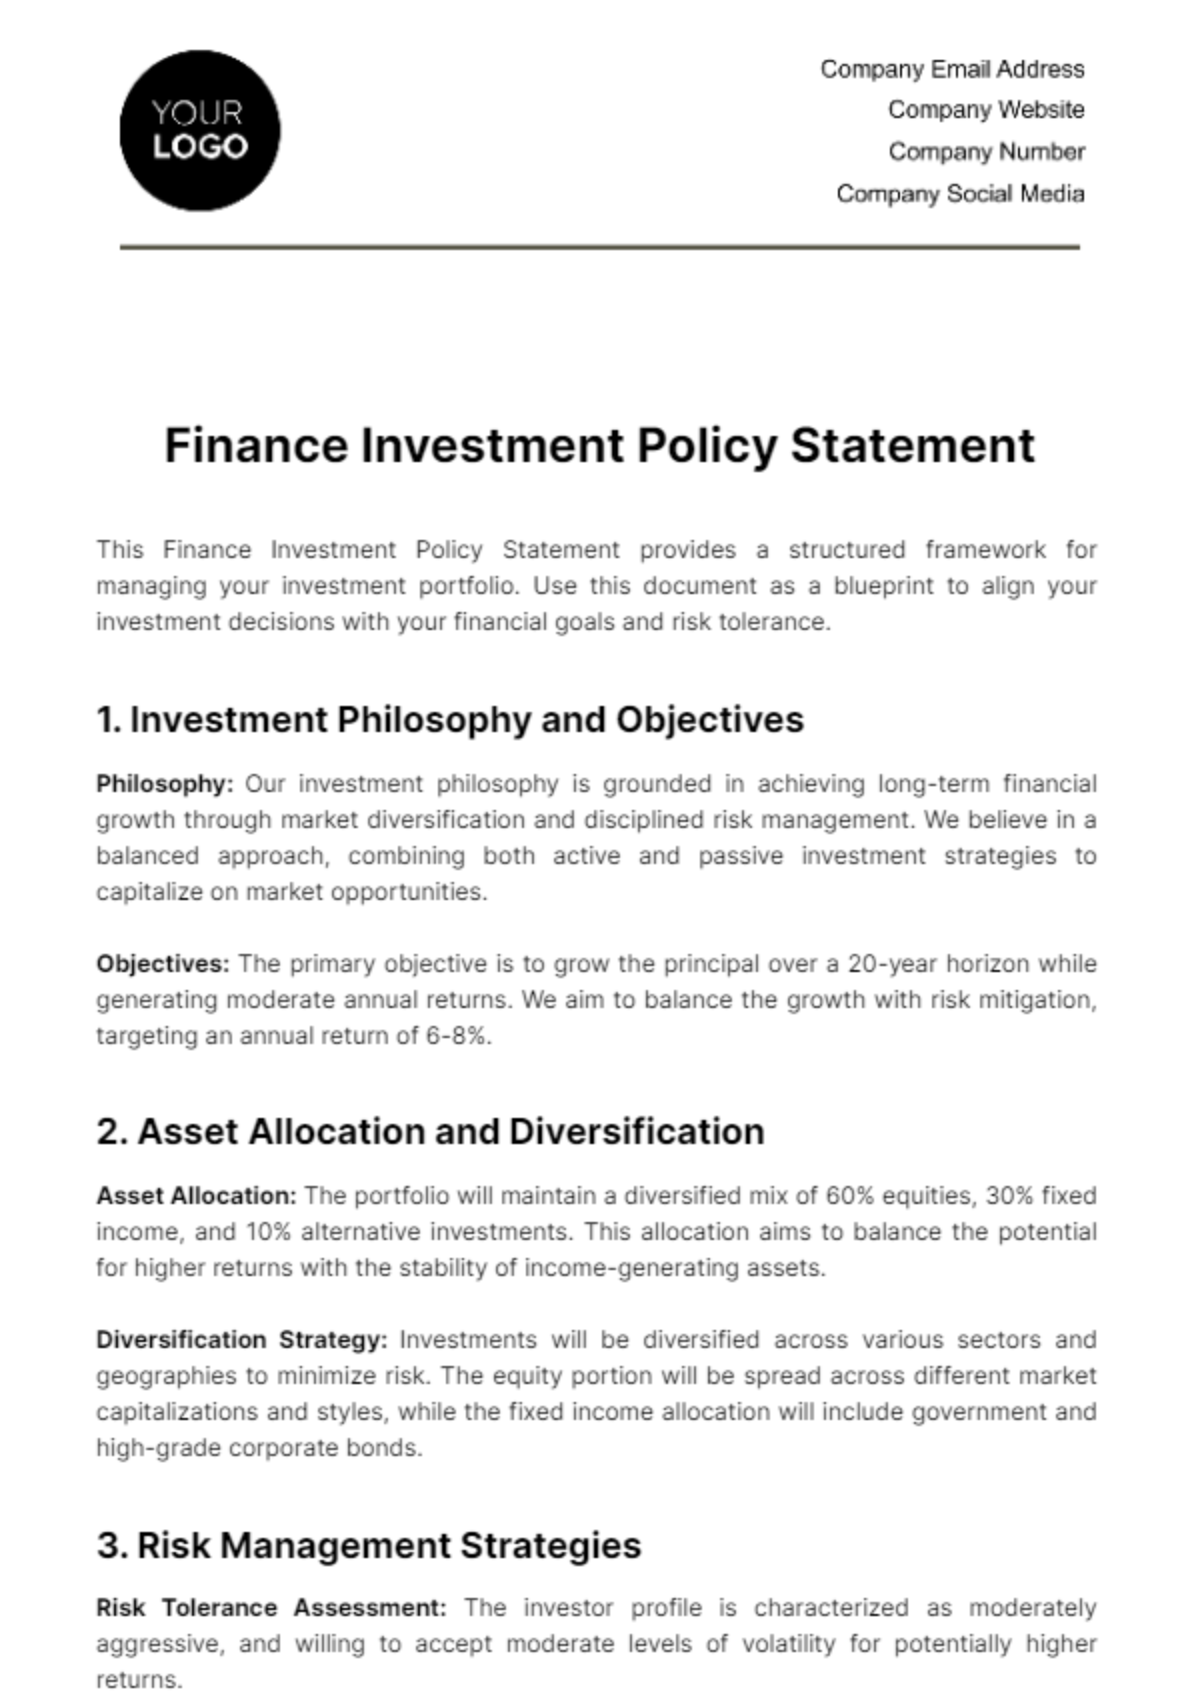 Finance Investment Policy Statement Template